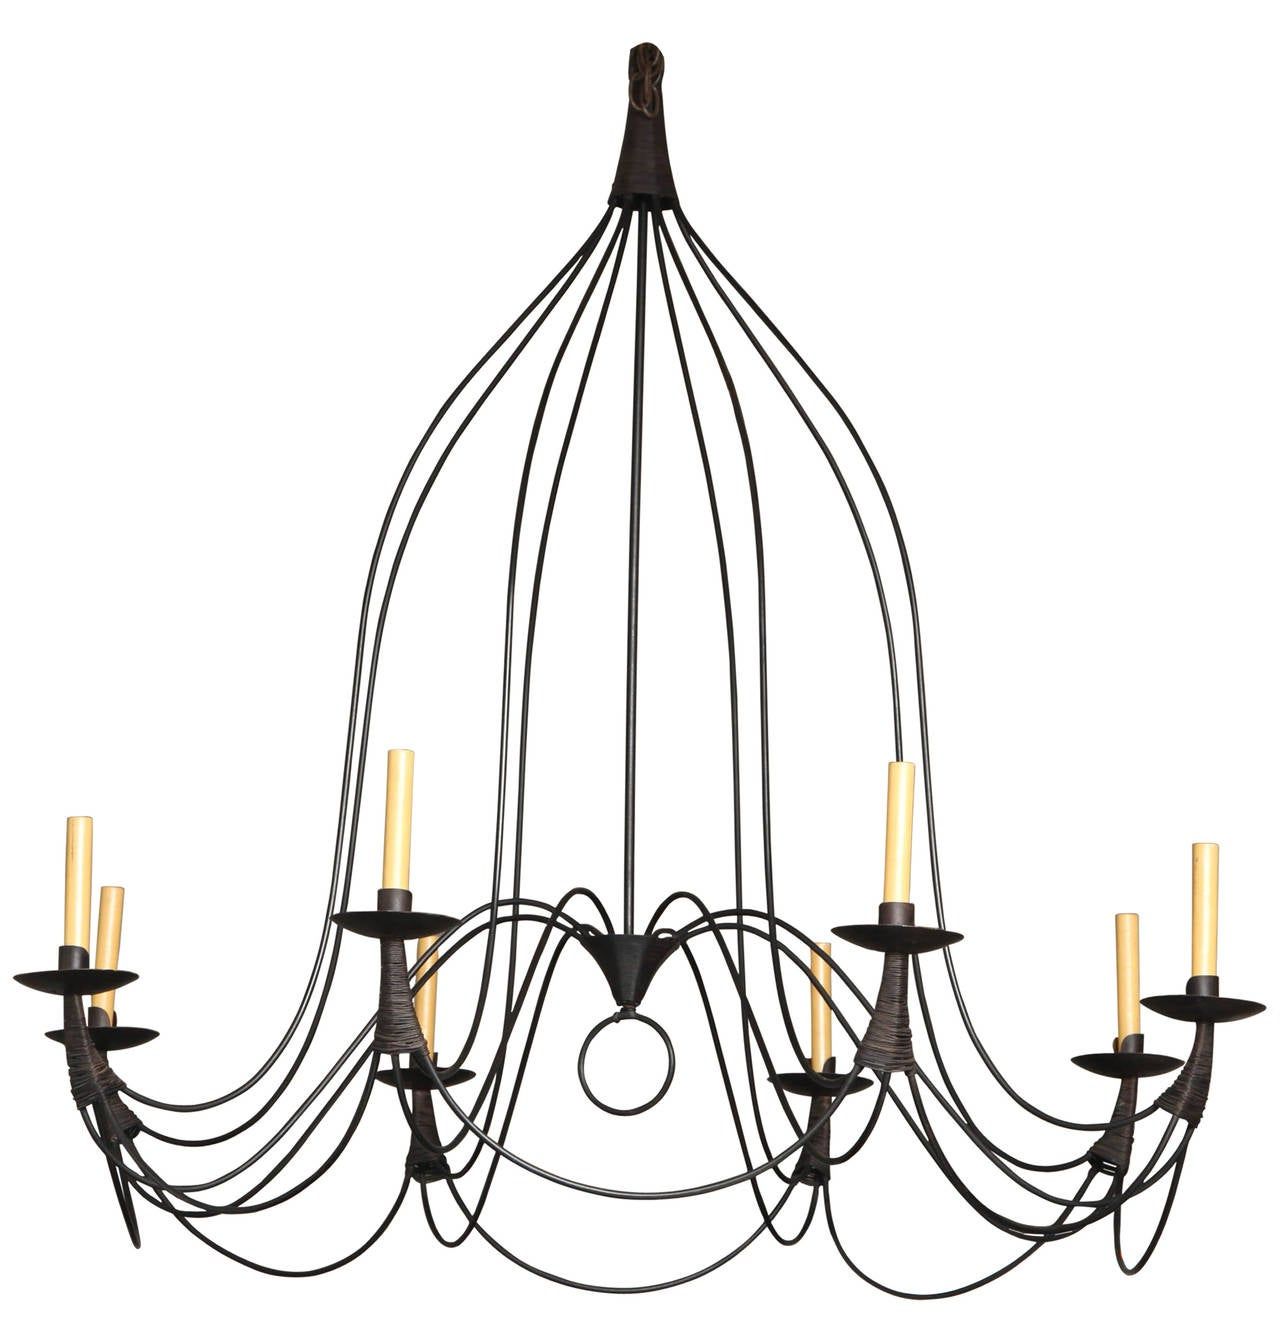 Trendy Midcentury Black Iron Eight Arm Chandelier At 1stdibs Intended For Black Iron Eight Light Minimalist Chandeliers (View 15 of 20)